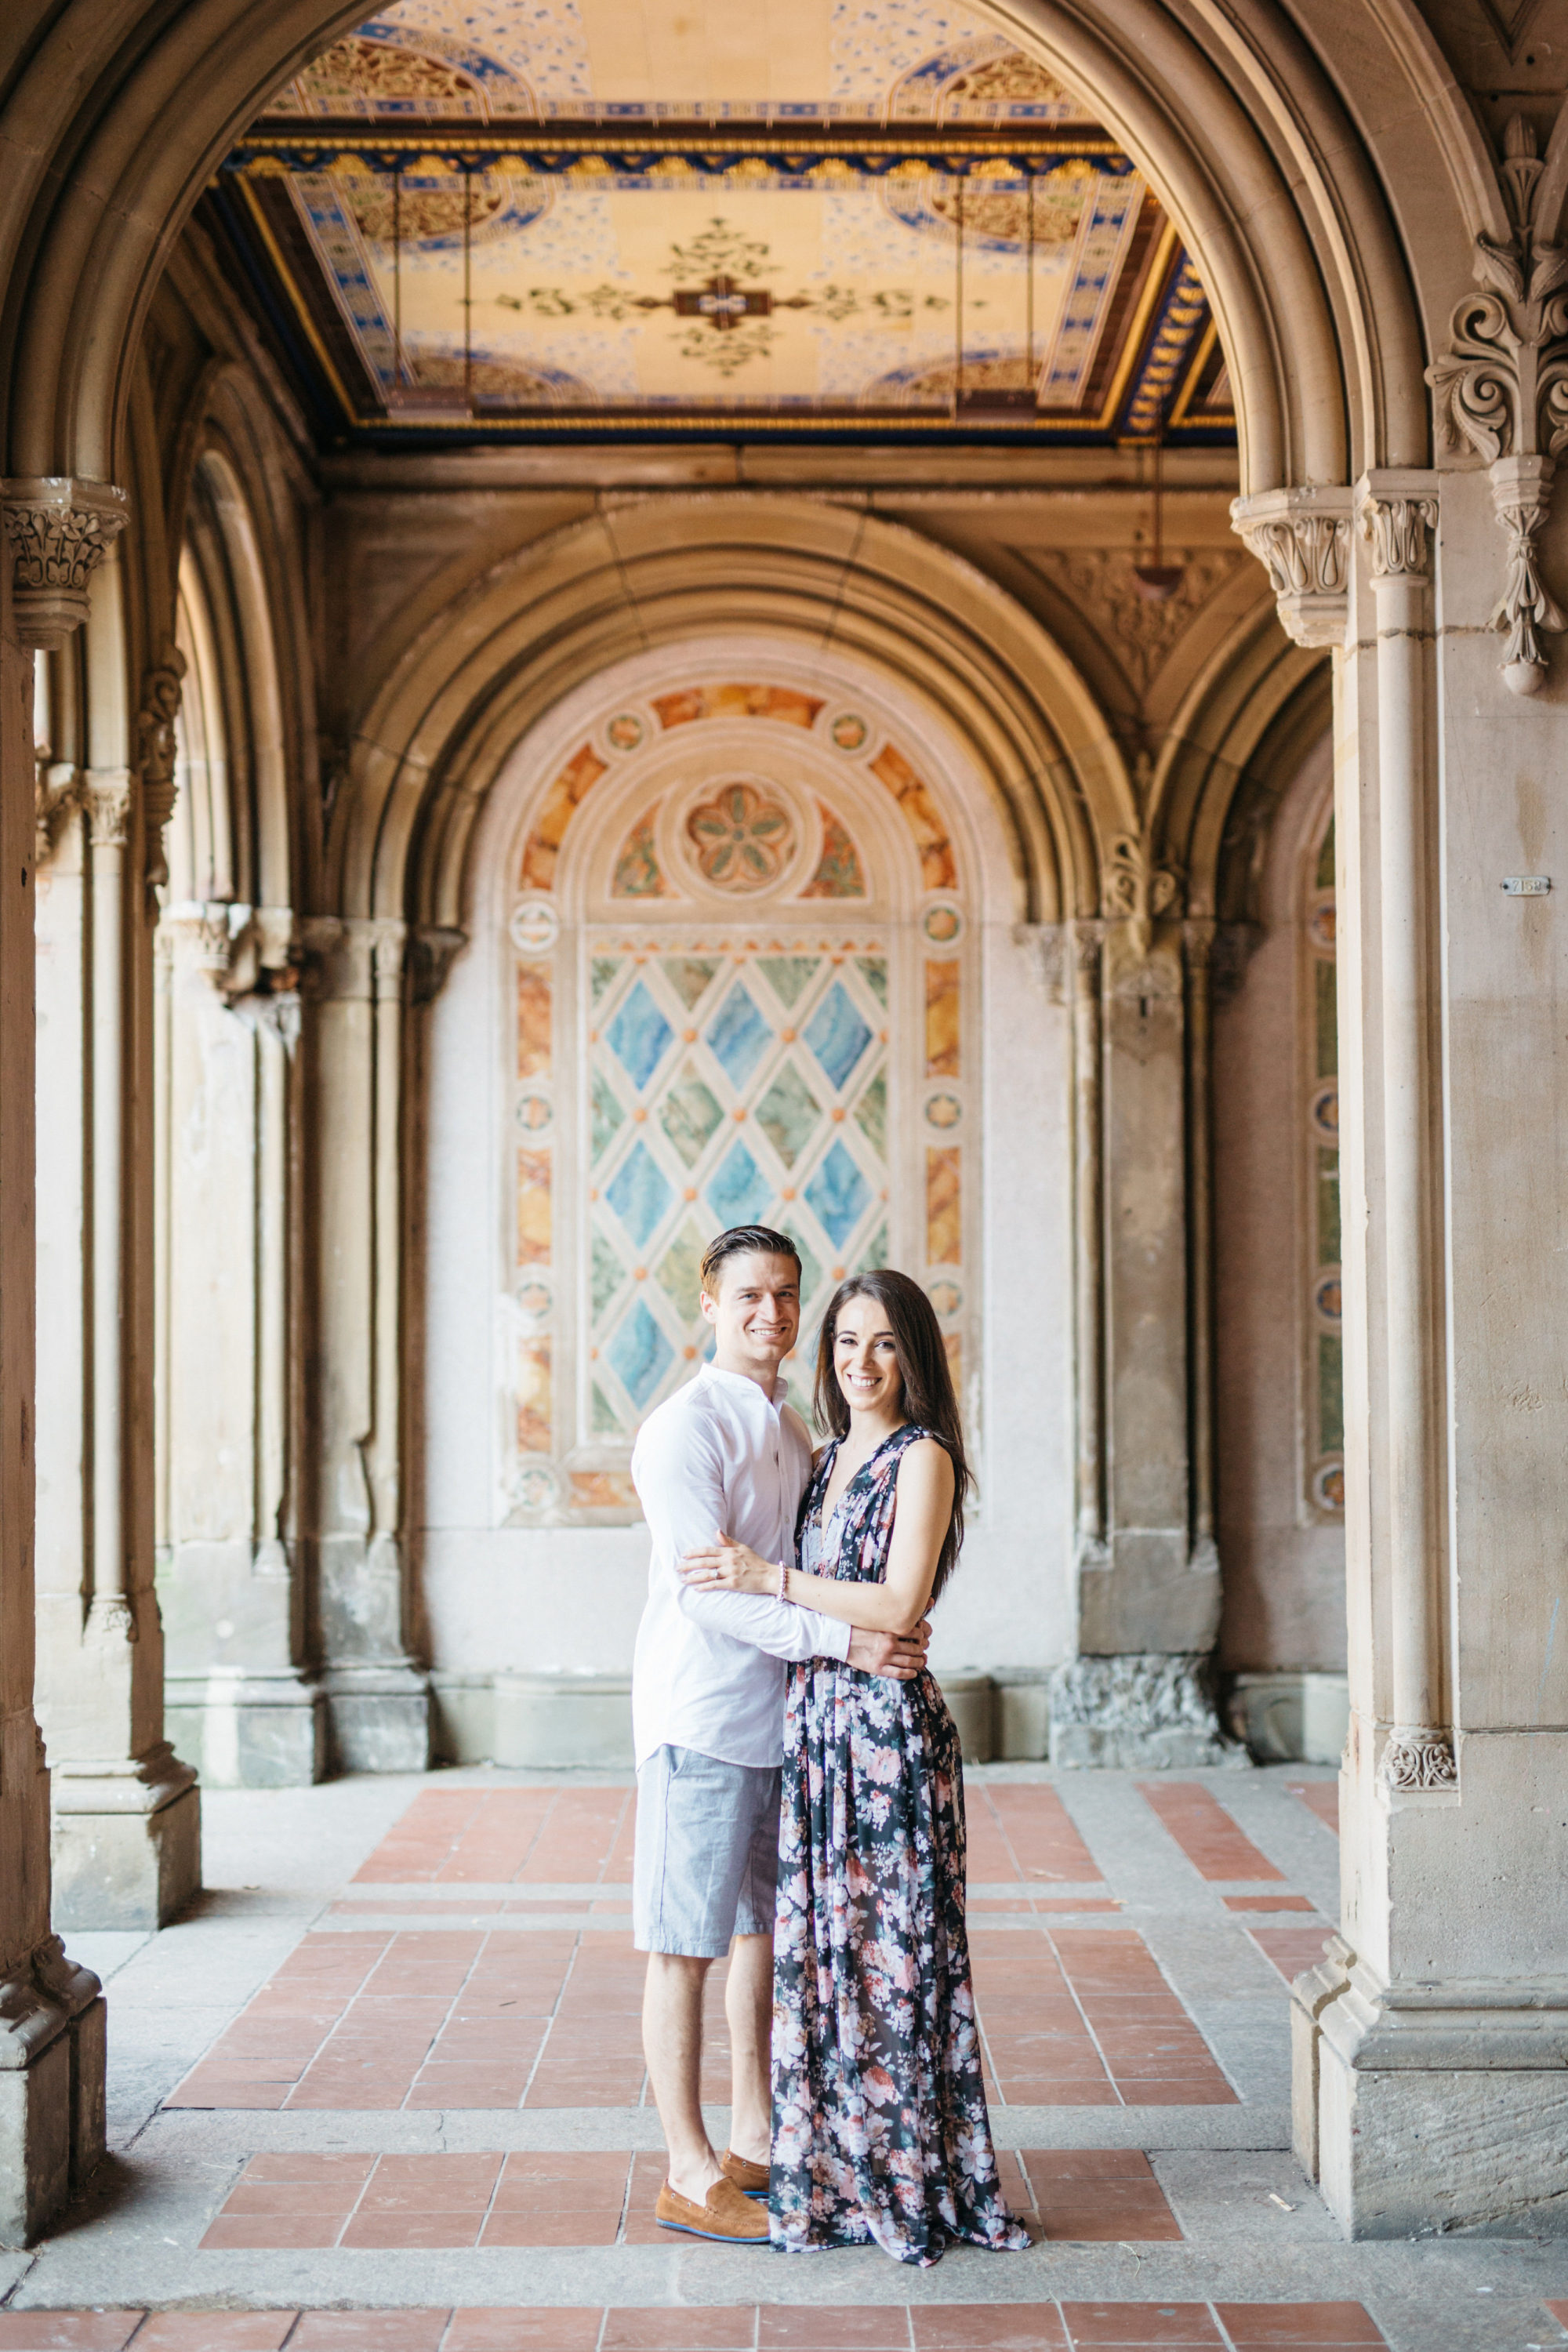 Couple in Bethesda Terrace in Central Park